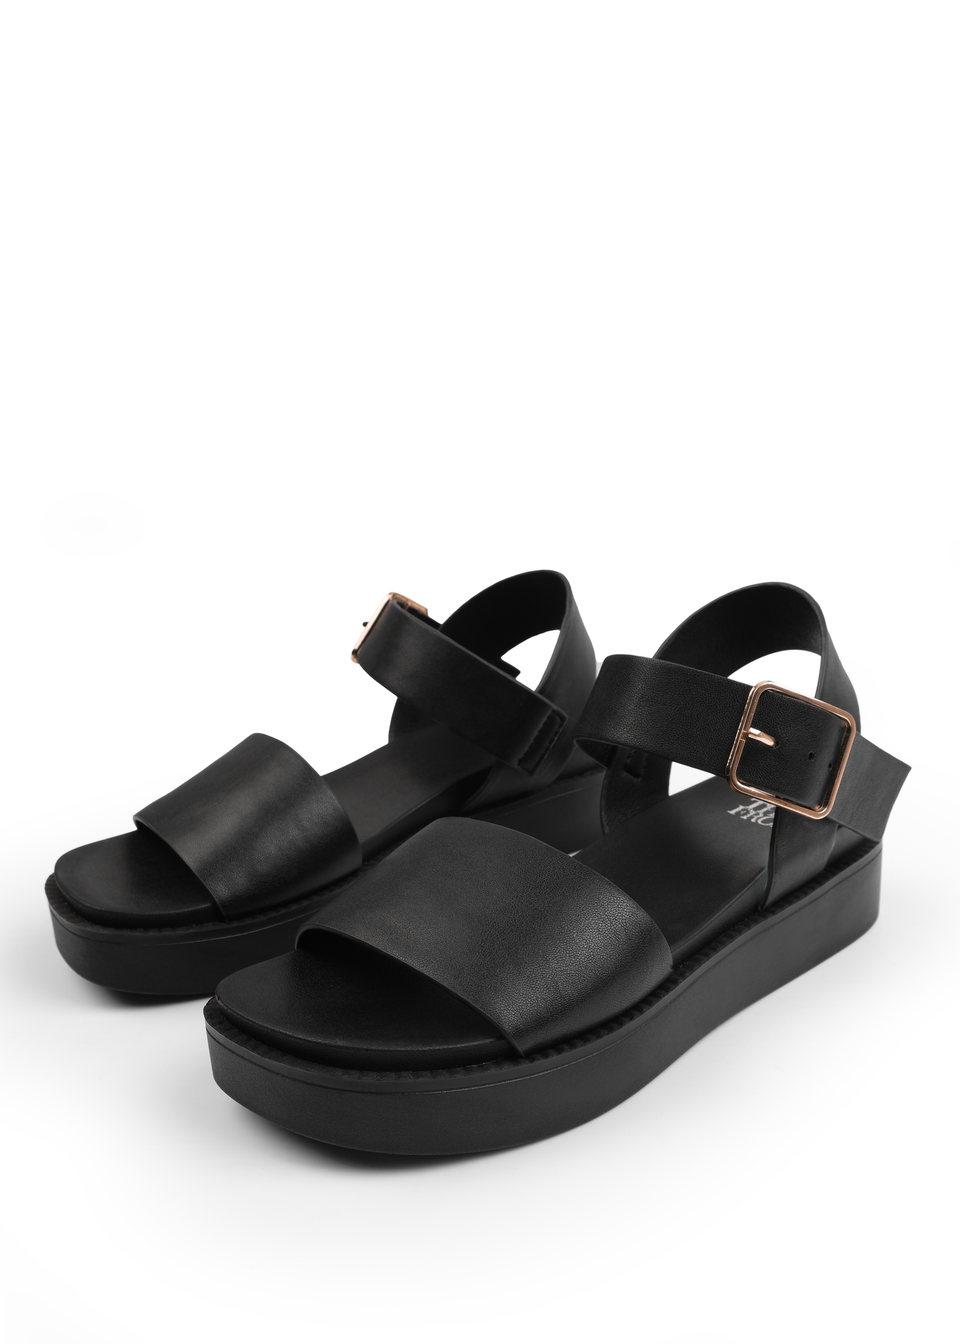 Where's That From Black Phoenix Extra Wide PU Flat Sandals